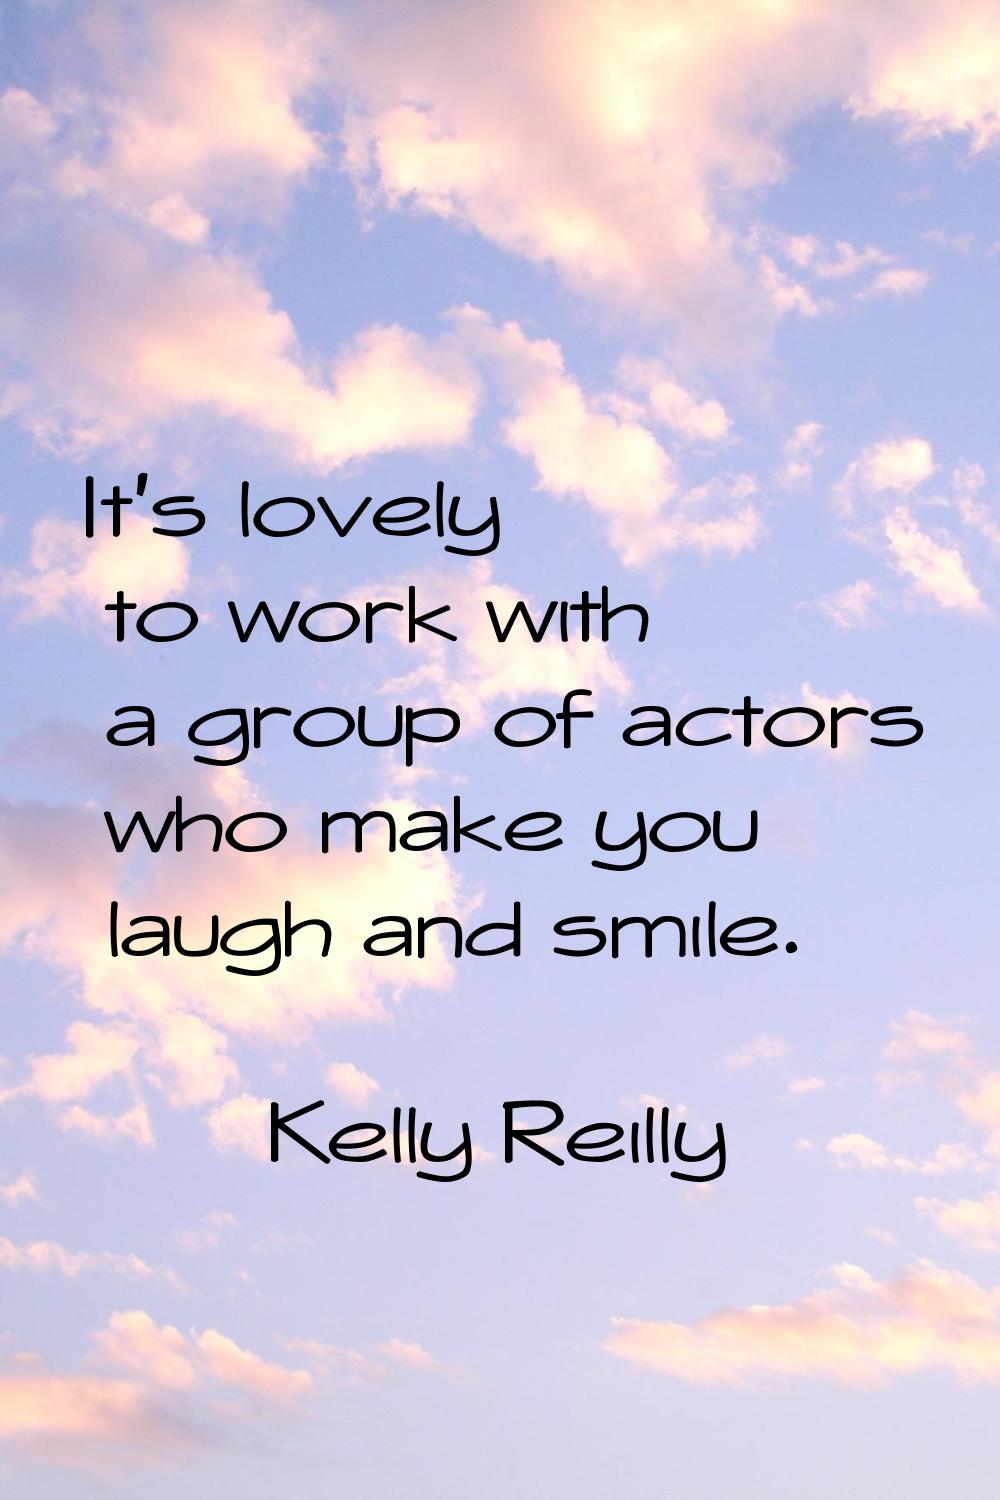 It's lovely to work with a group of actors who make you laugh and smile.